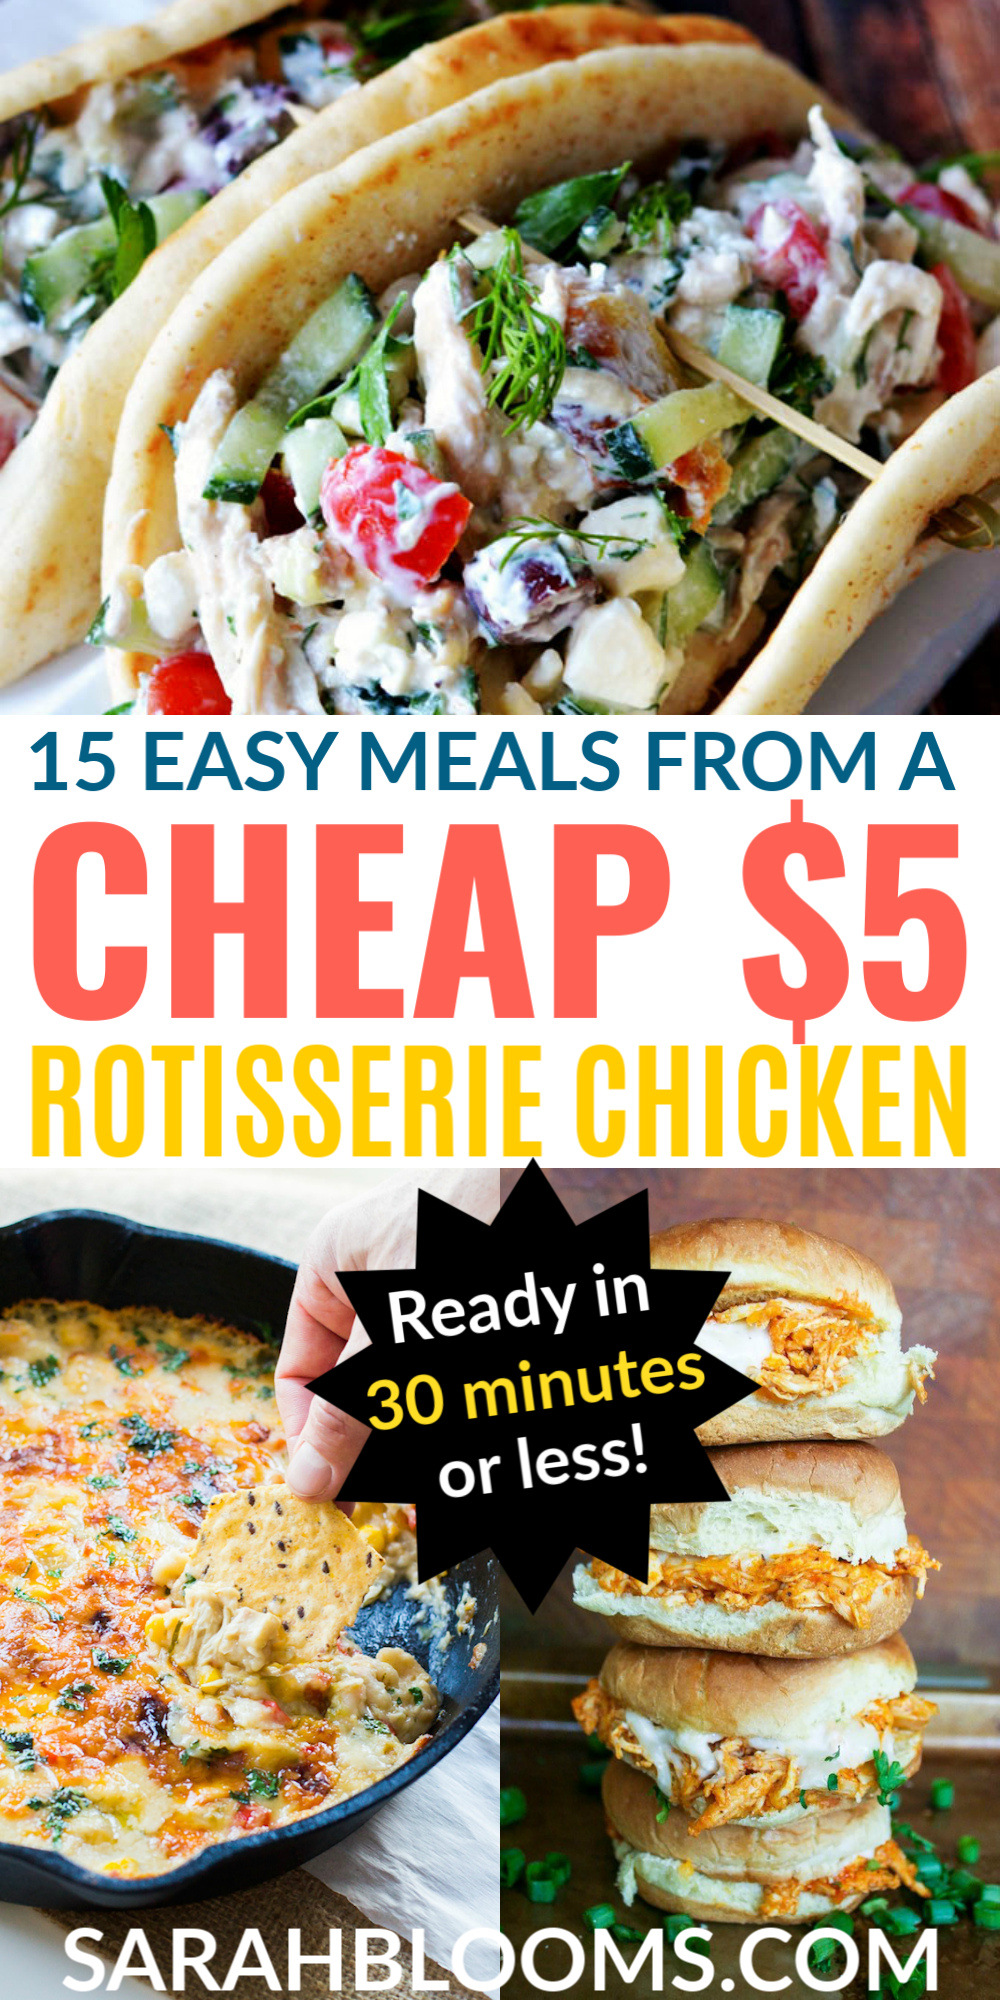 Put dinner on the table in 30 minutes or left with these budget-friendly chicken shortcut meals you can make with leftover chicken or a cheap $5 rotisserie chicken! #quickmeals #quickrecipes #rotisseriechicken #chickenrecipes #chickenmeals #familymeals #frugalmeals #SarahBlooms